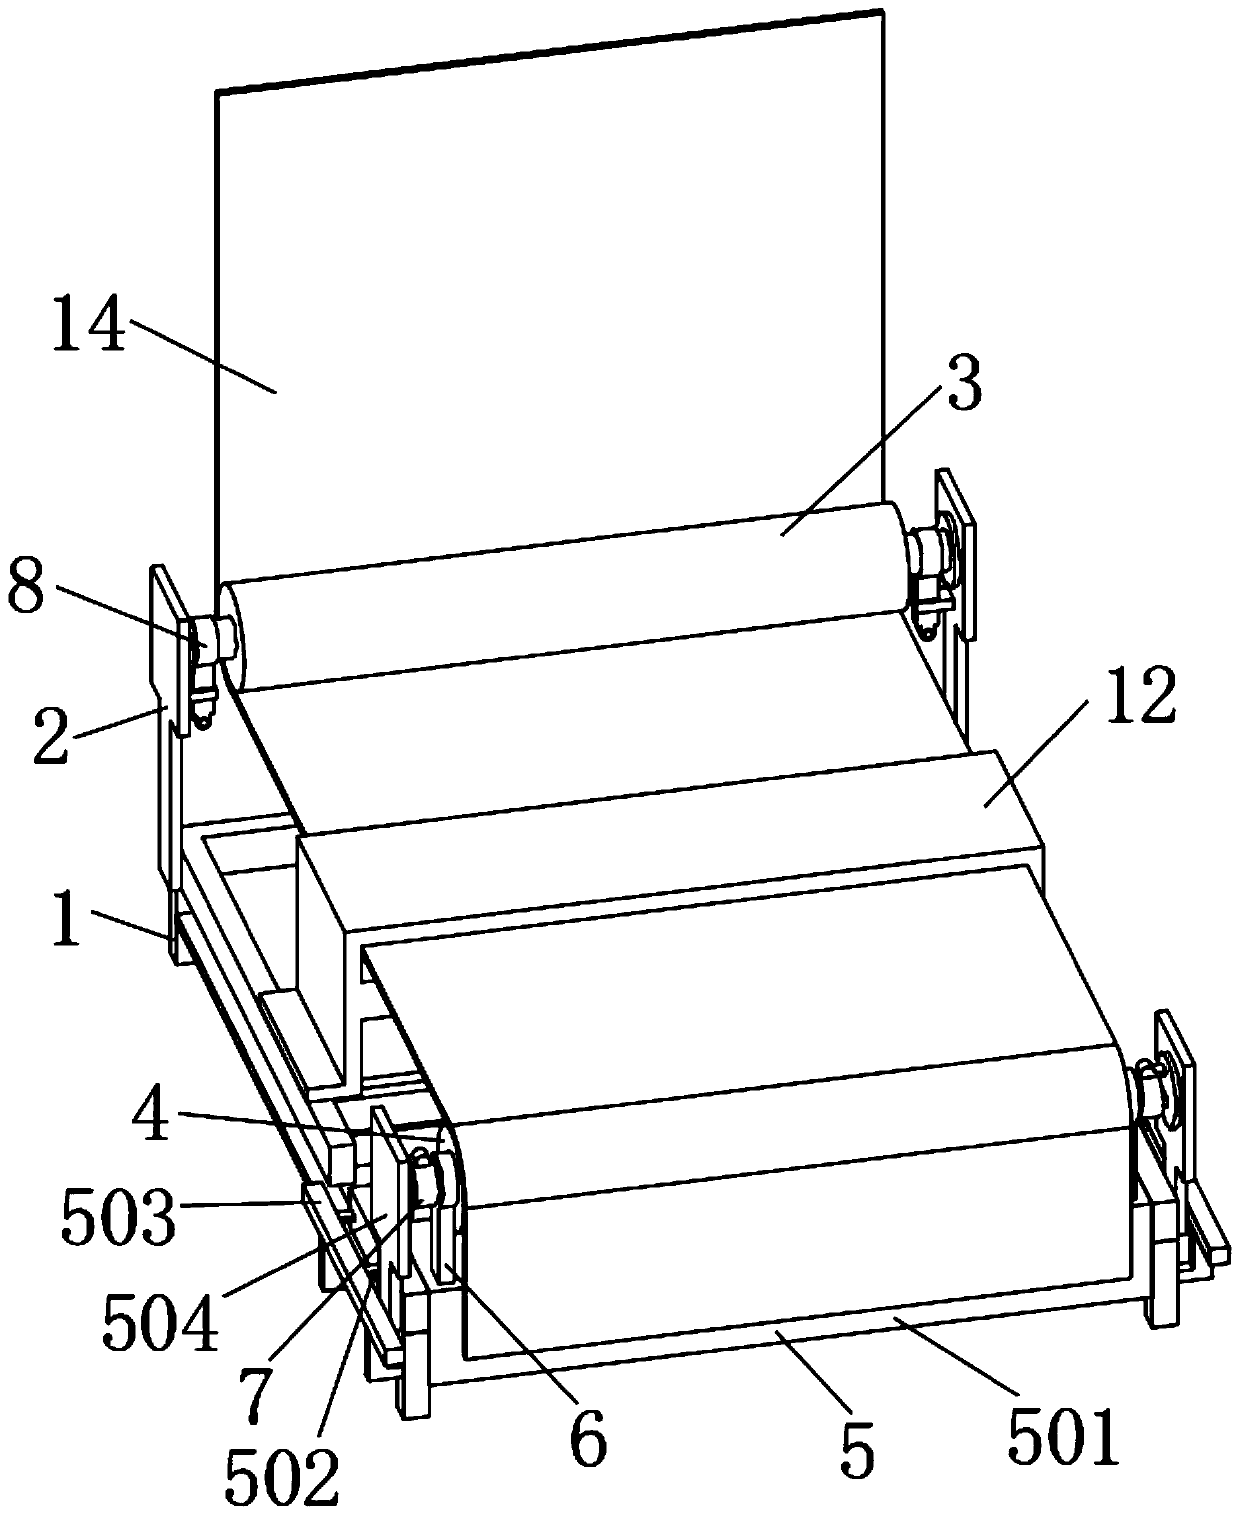 A production leveling device for anti-warping of light guide film